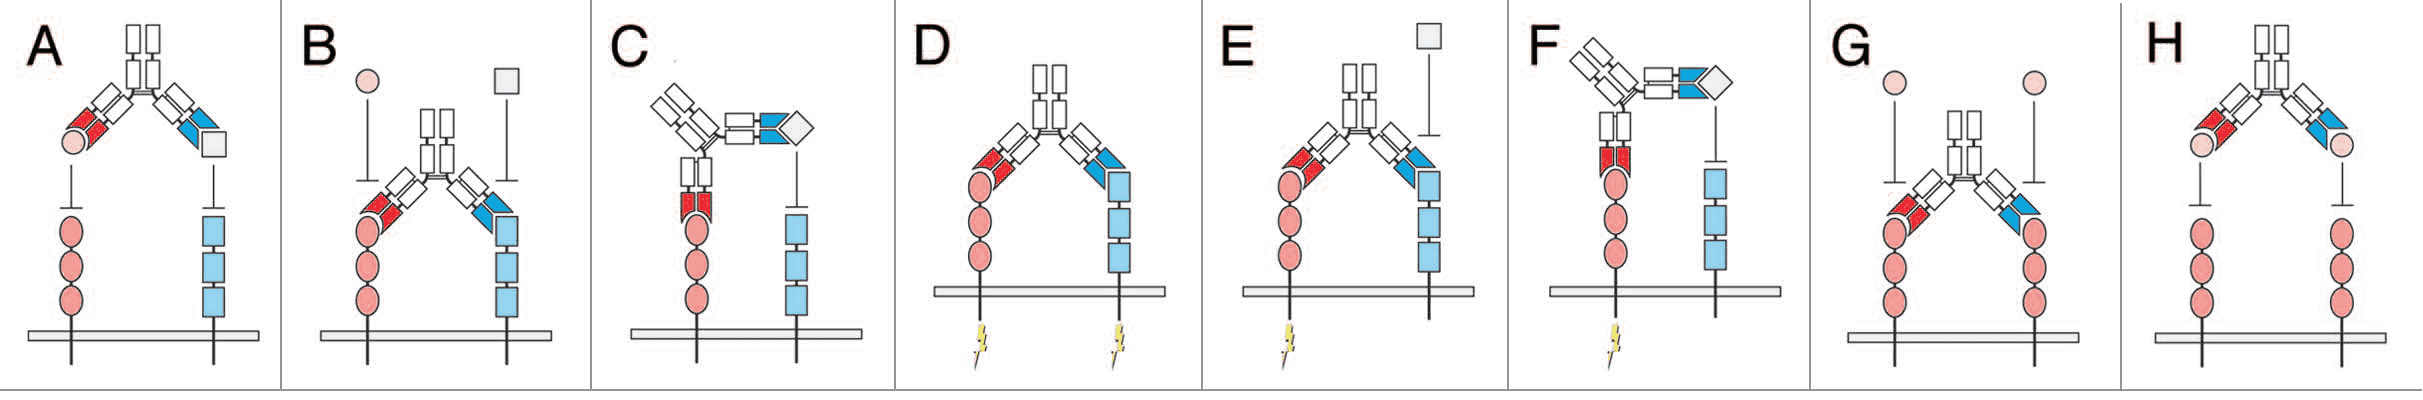 Bispecific Antibody (BsAb) Sequencing